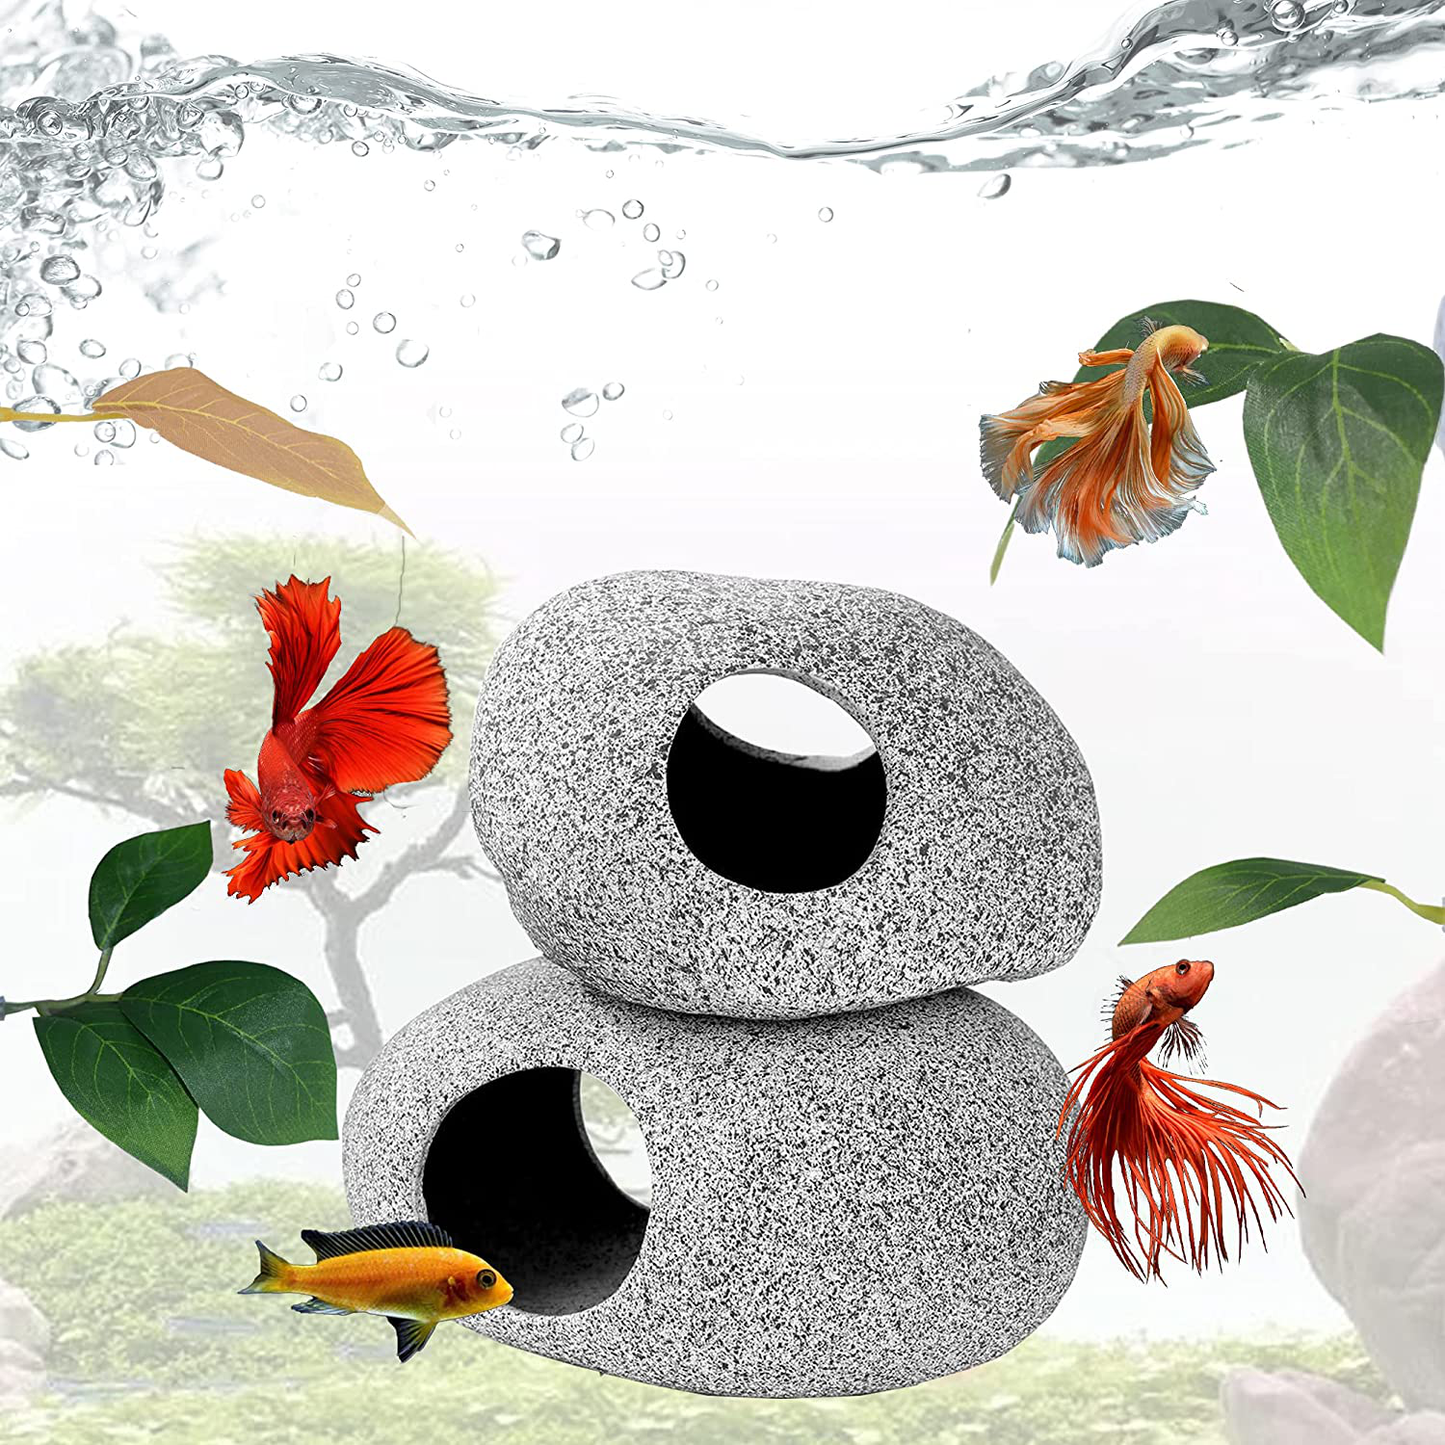 Llglmypet 2 Pieces Aquarium Decoration Rock Caves and 6 Pieces Fish Leaf Pad Simulating the Natural Habitat Hiding Breeding Spawning Cave Stones Toys Fish Rock House for Shrimp Cichlid Betta Fish Animals & Pet Supplies > Pet Supplies > Fish Supplies > Aquarium Decor Llglmypet   